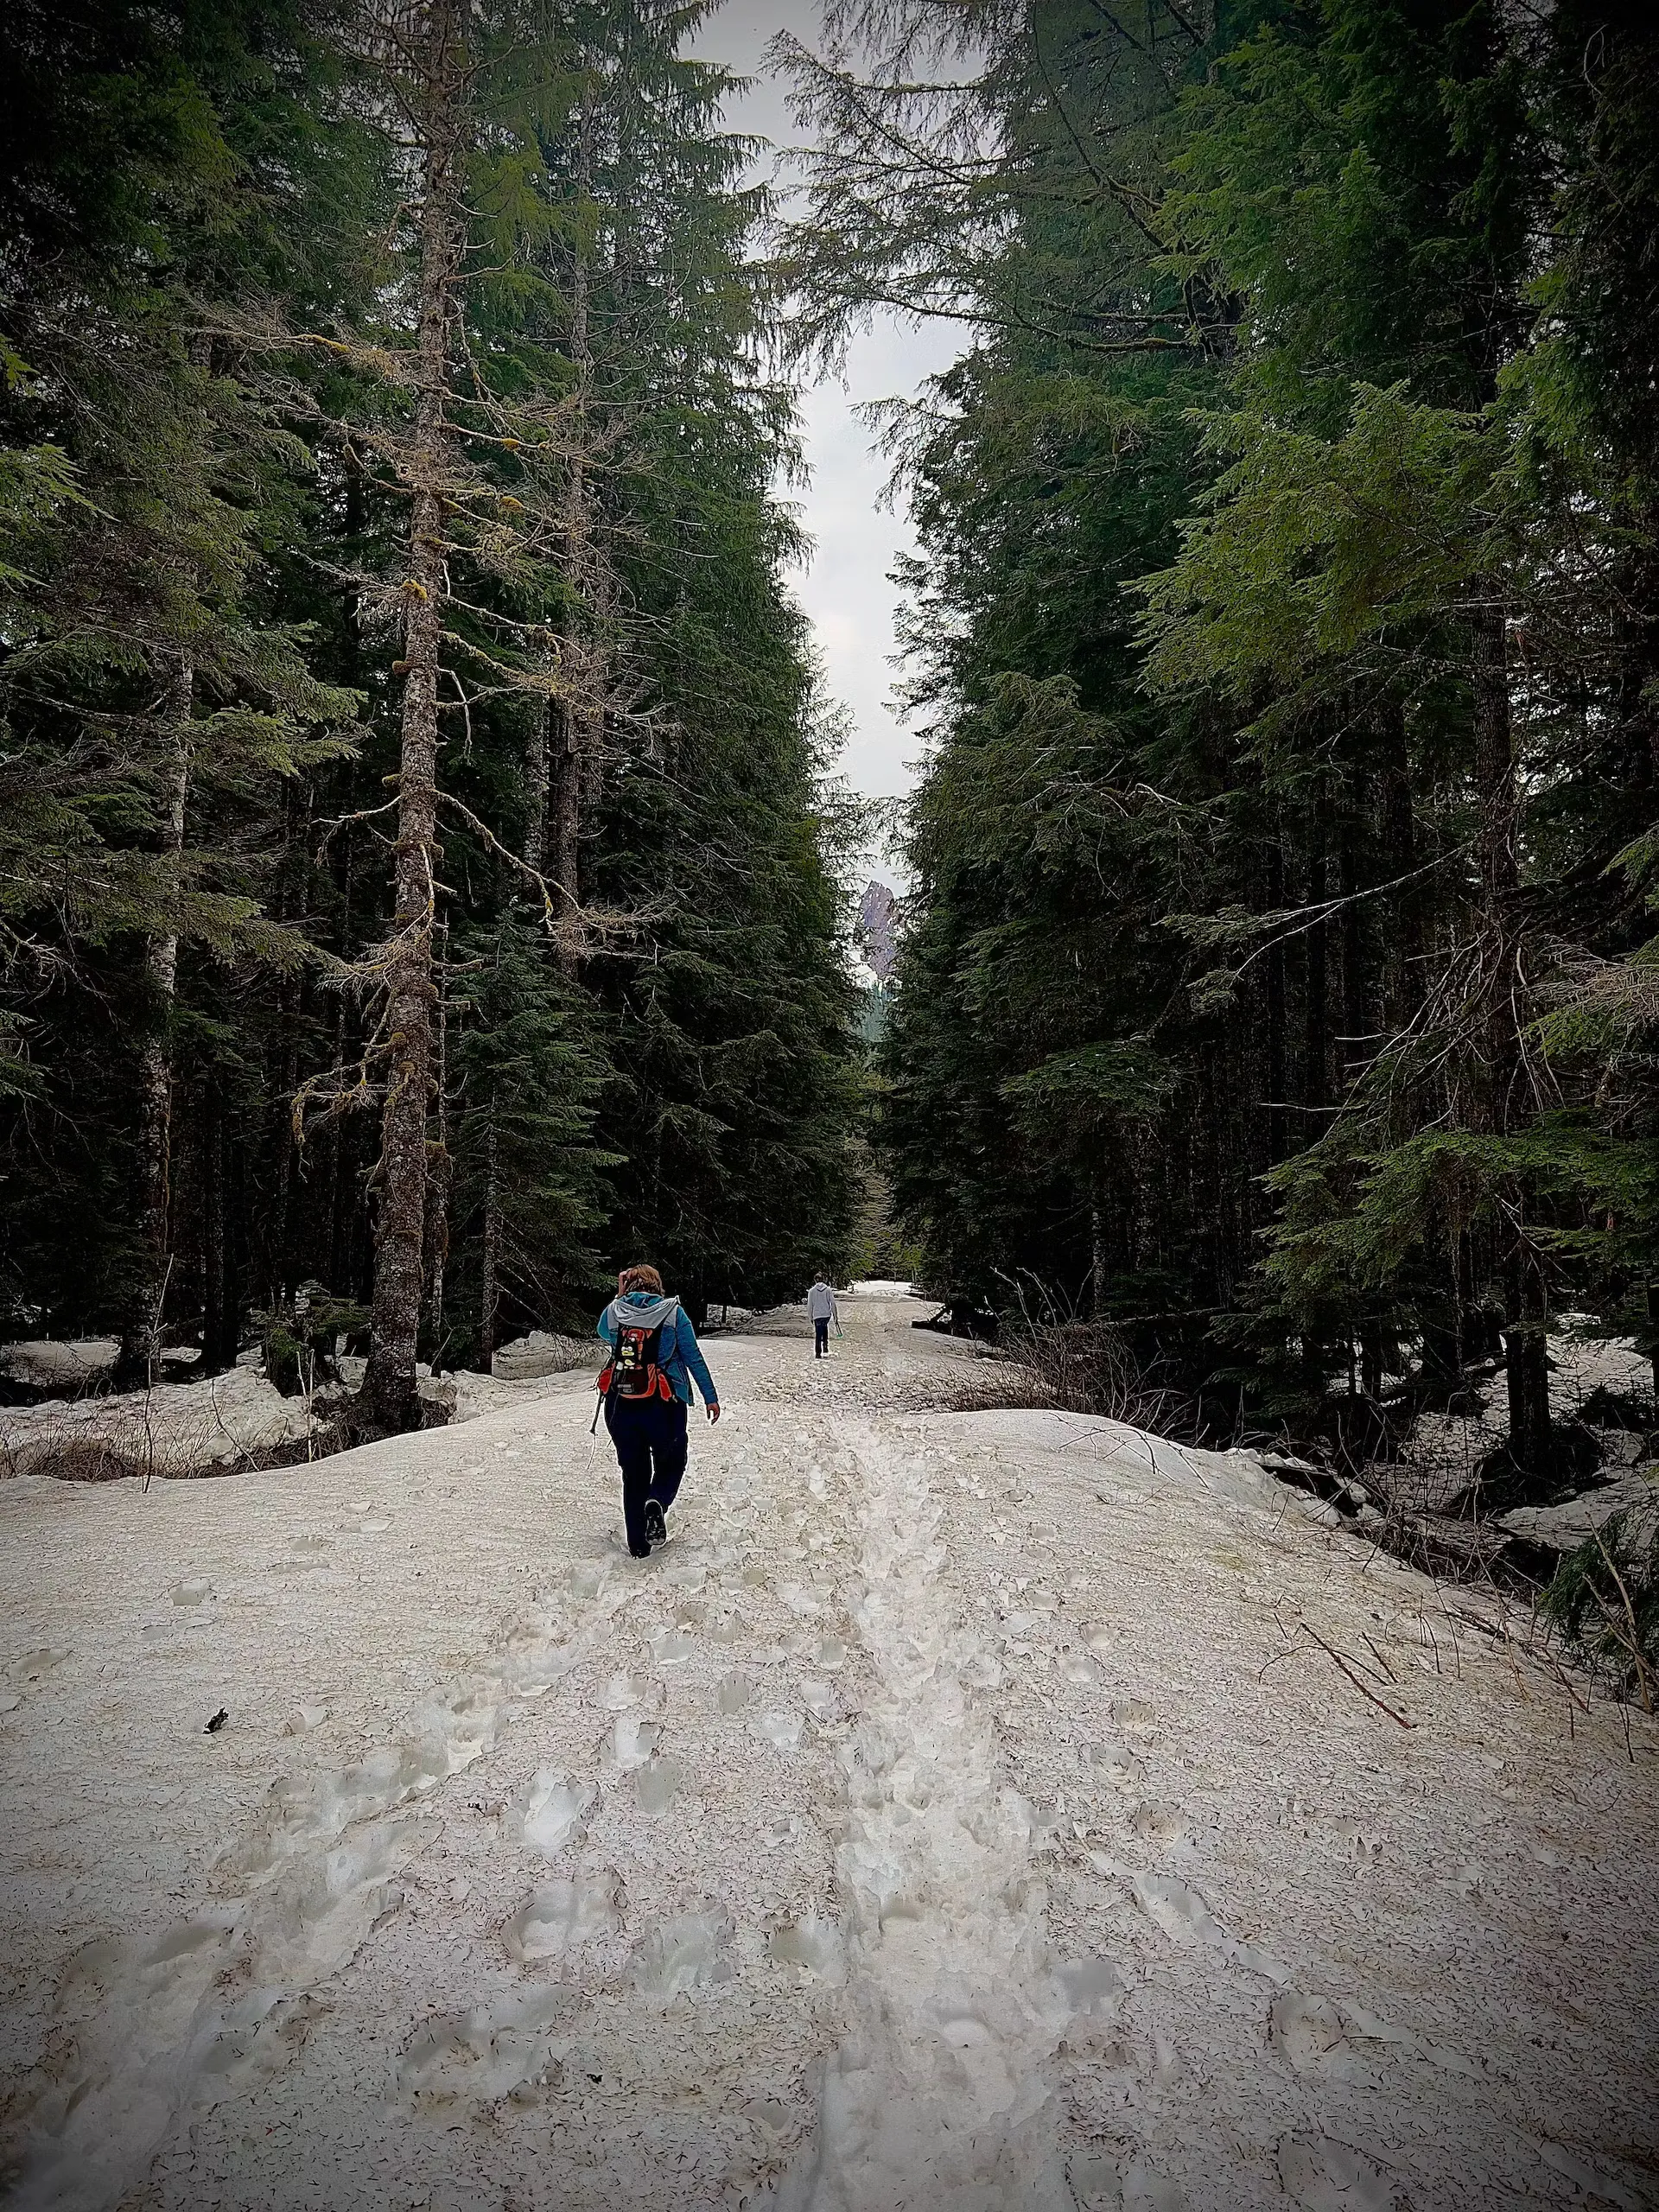 Walking on a snow path on the Old Monte Cristo road